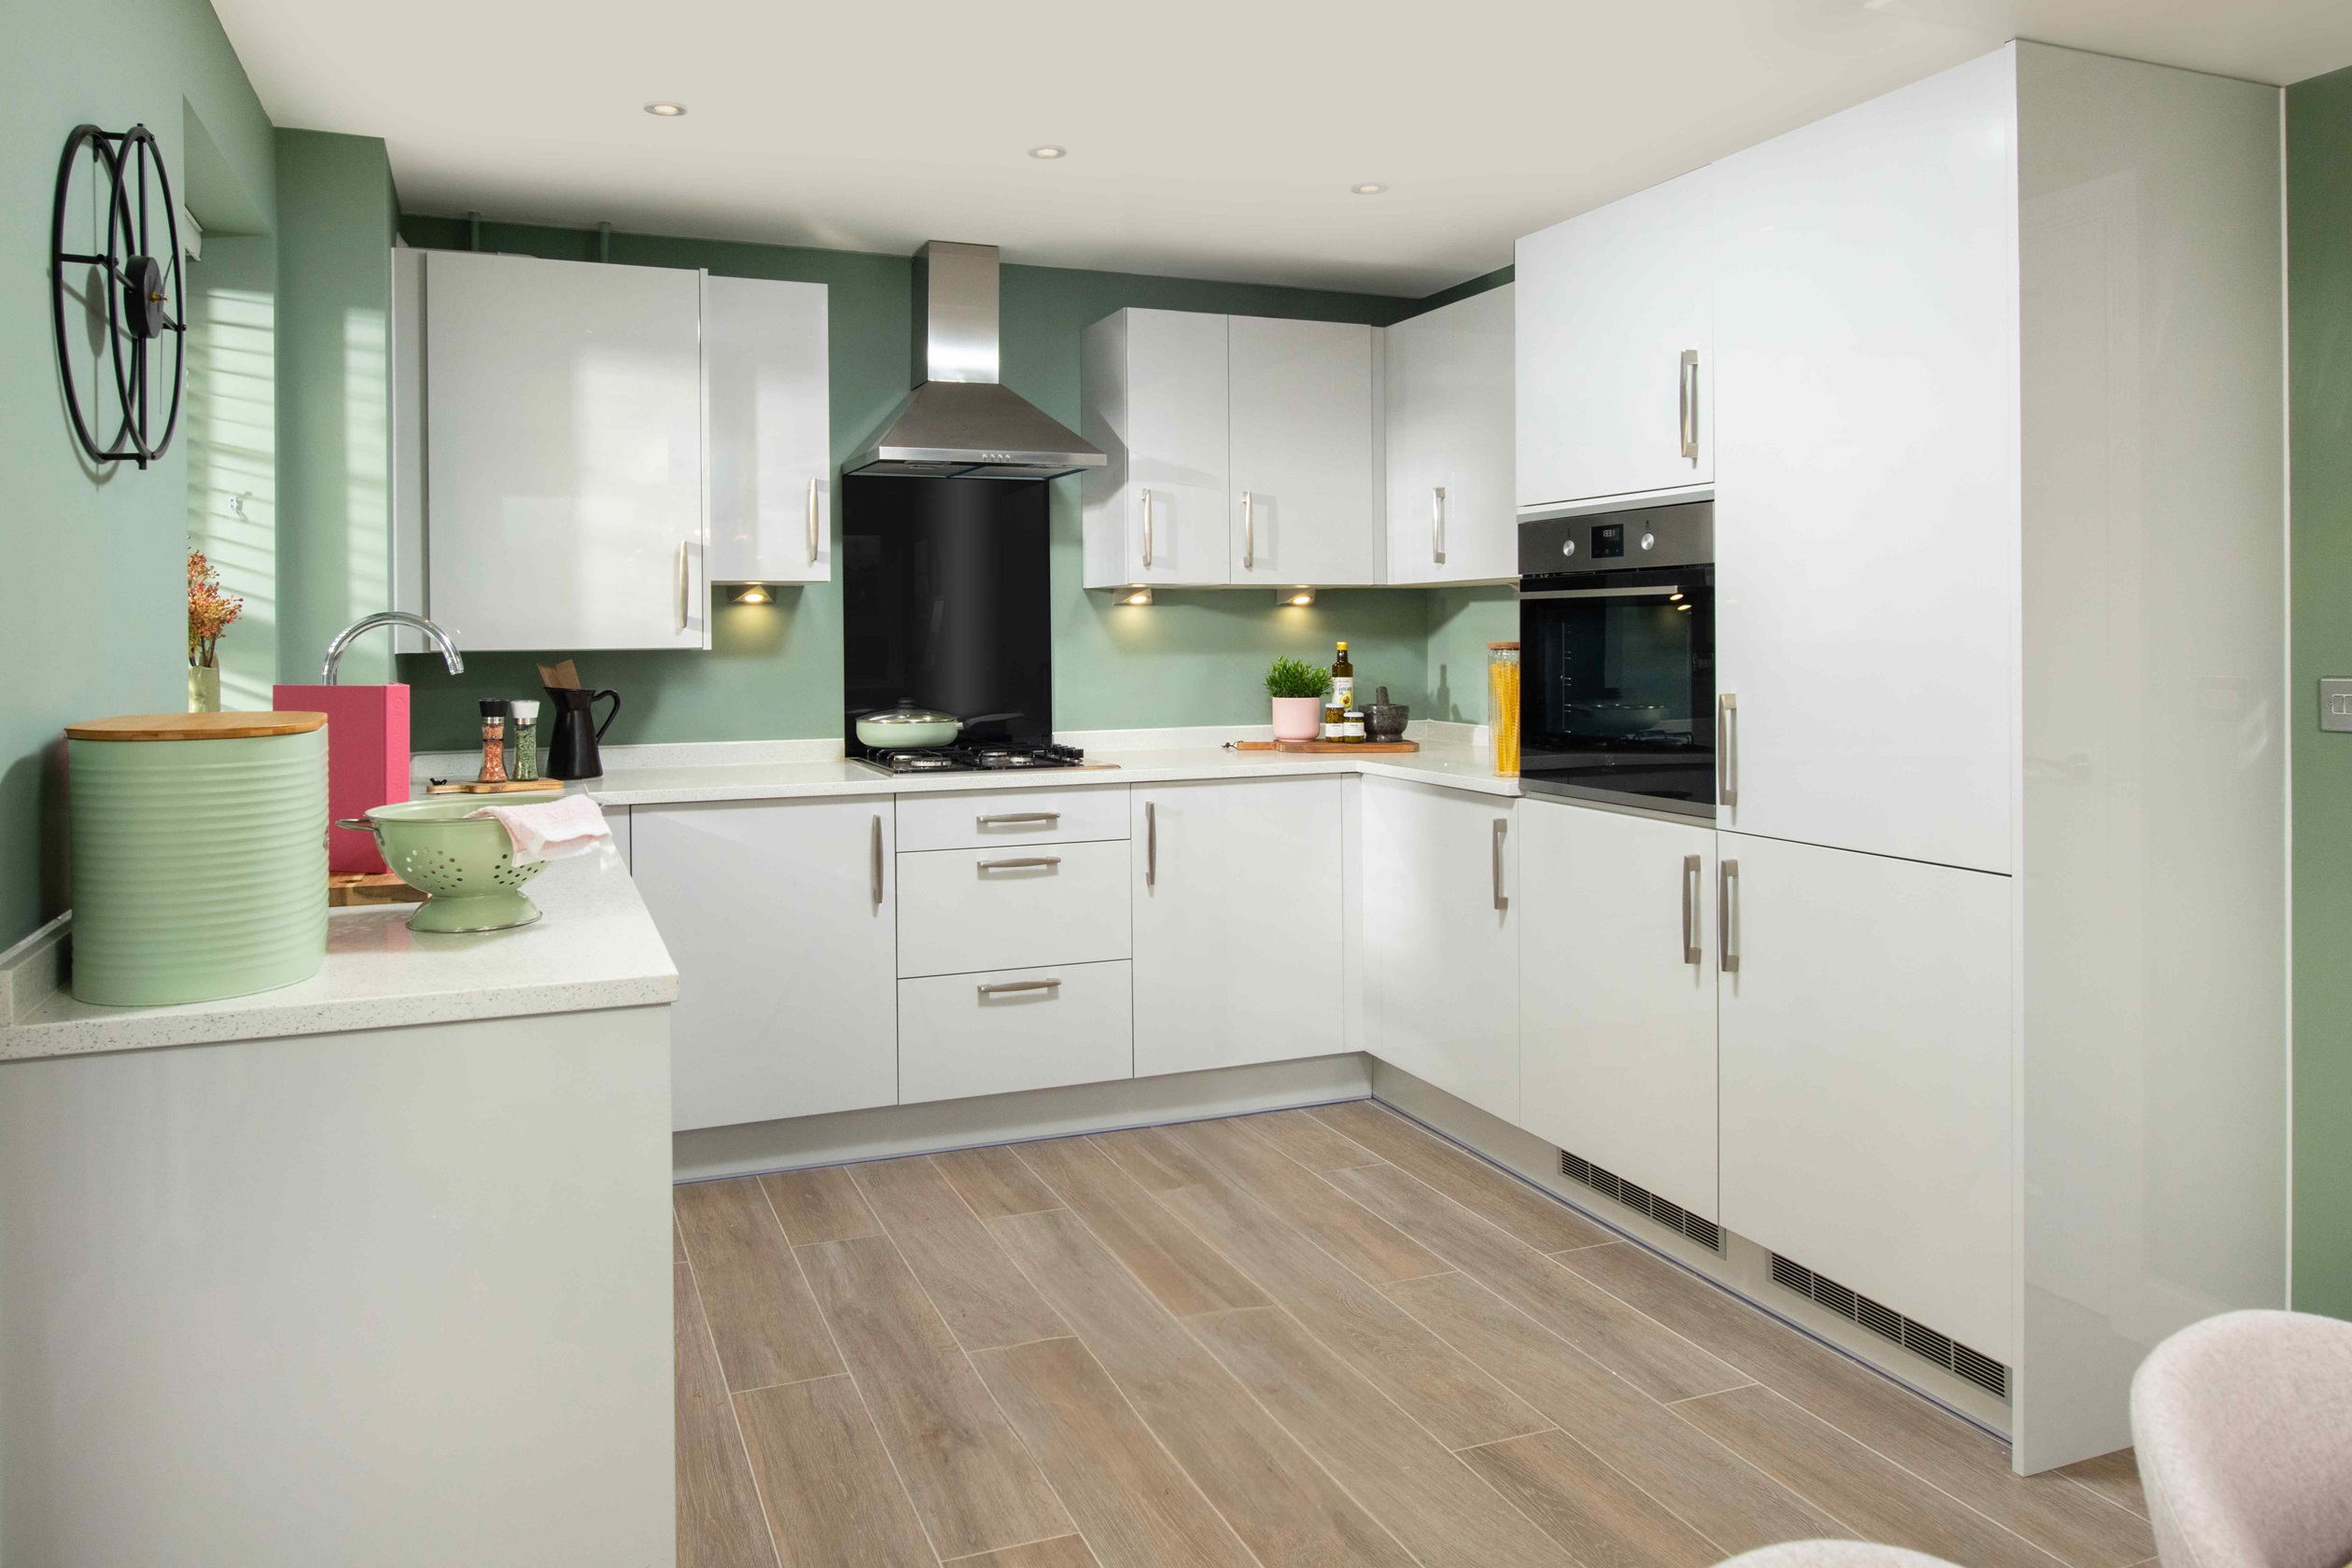 Property 2 of 9. The Hesketh Kitchen